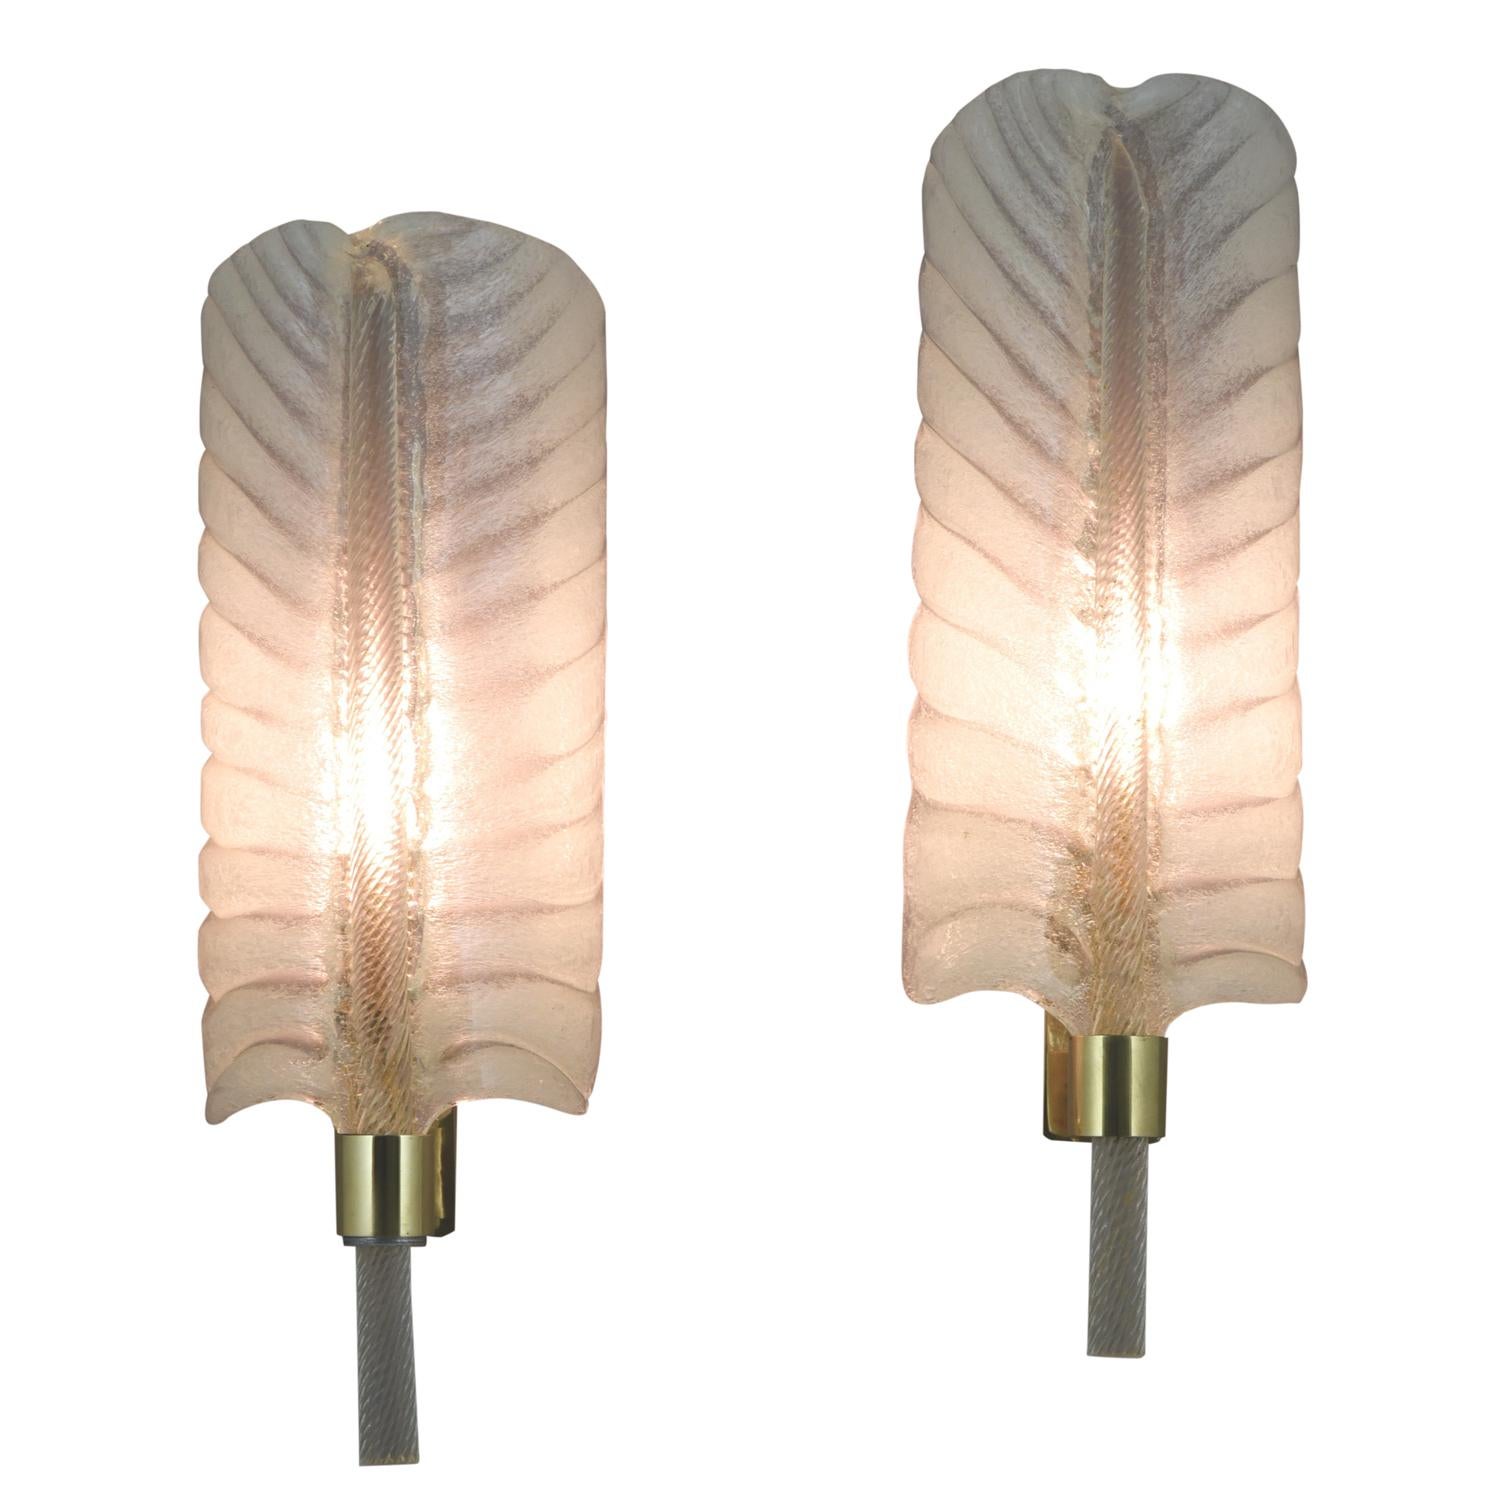 Large pair of midcentury feather shaped glass sconces.
This design is attributed to André Arbus 1903-1969 who designed lighting for Veronese between 1946 and 1952. 
These sconces were produced by Seguso Vetri d'Arte at Murano. 

Feather shaped